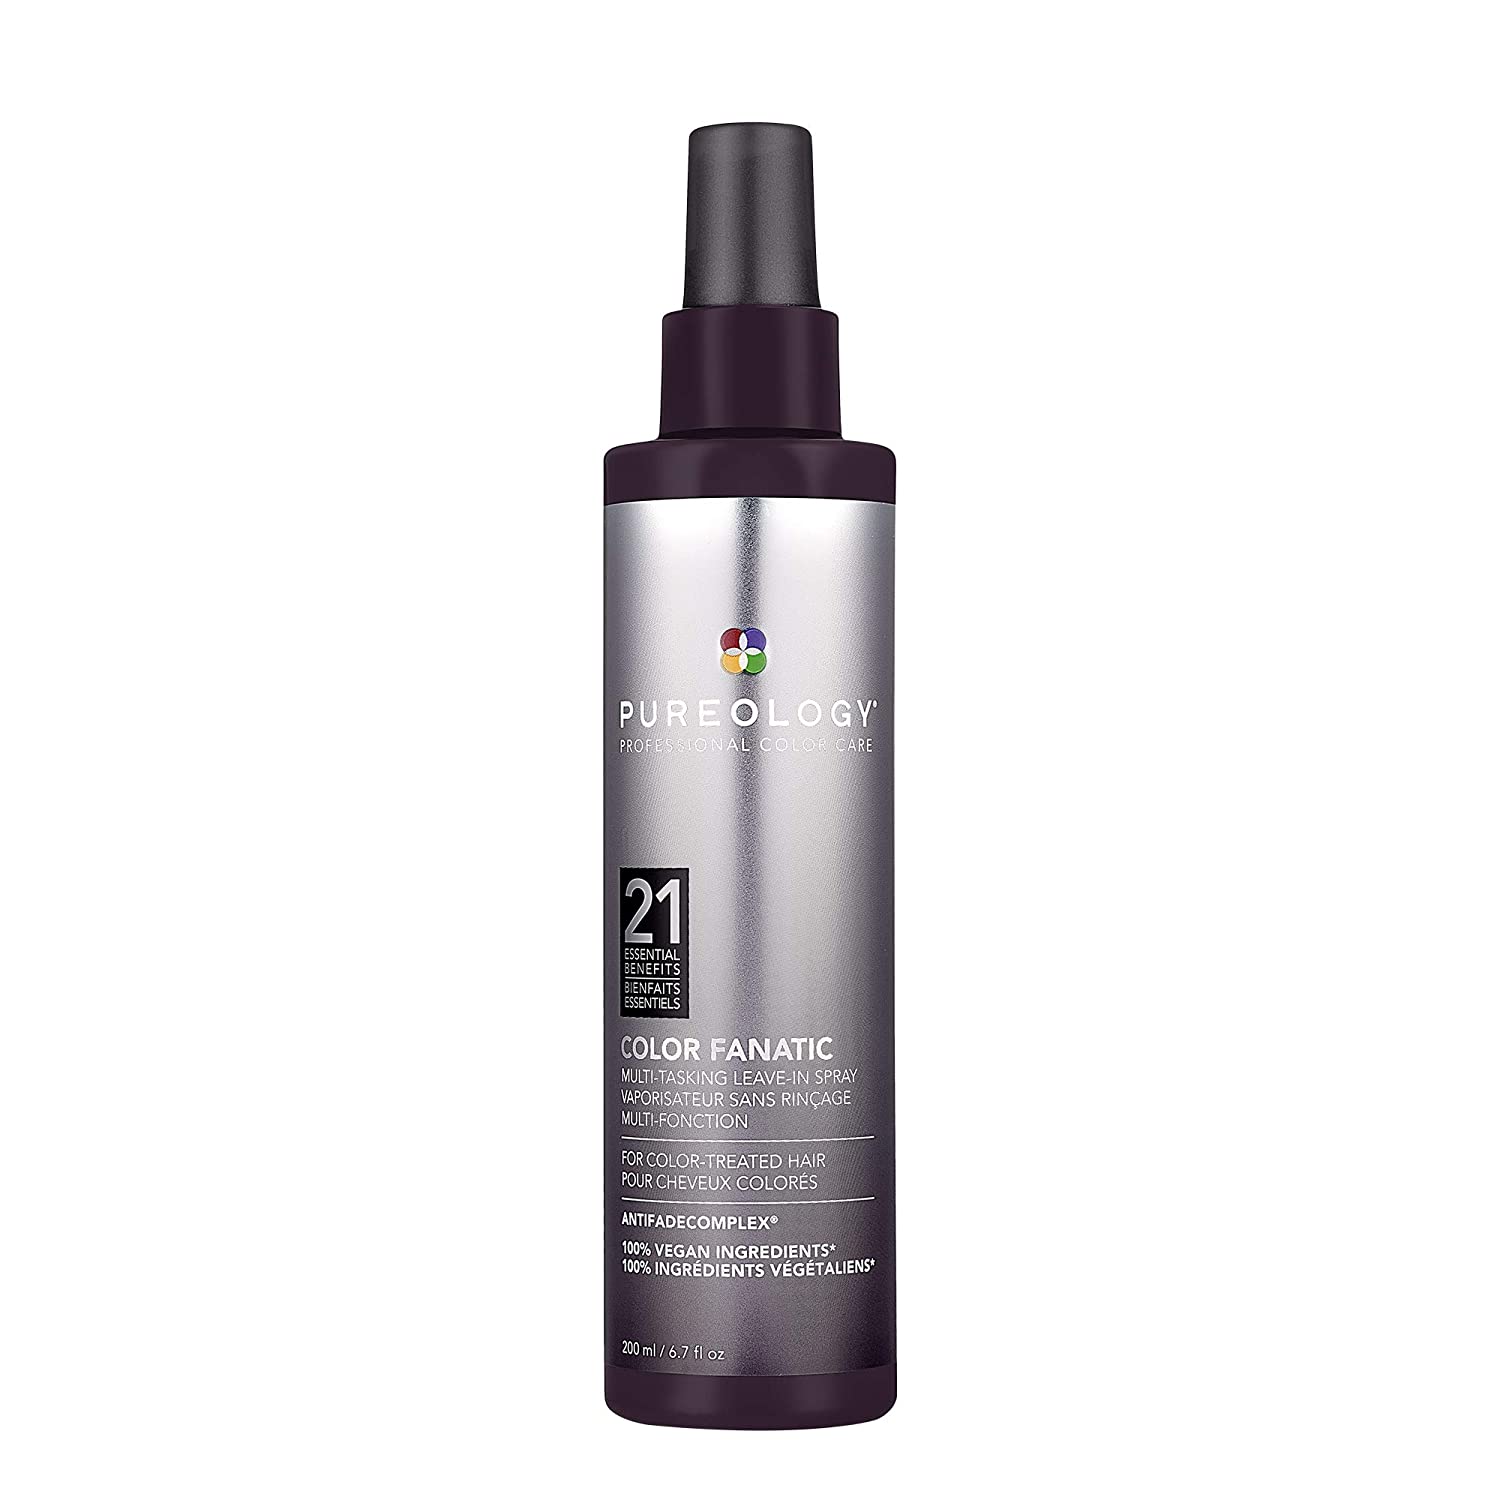 Pureology Color Fanatic Leave-in Conditioner Hair Treatment Detangling Spray